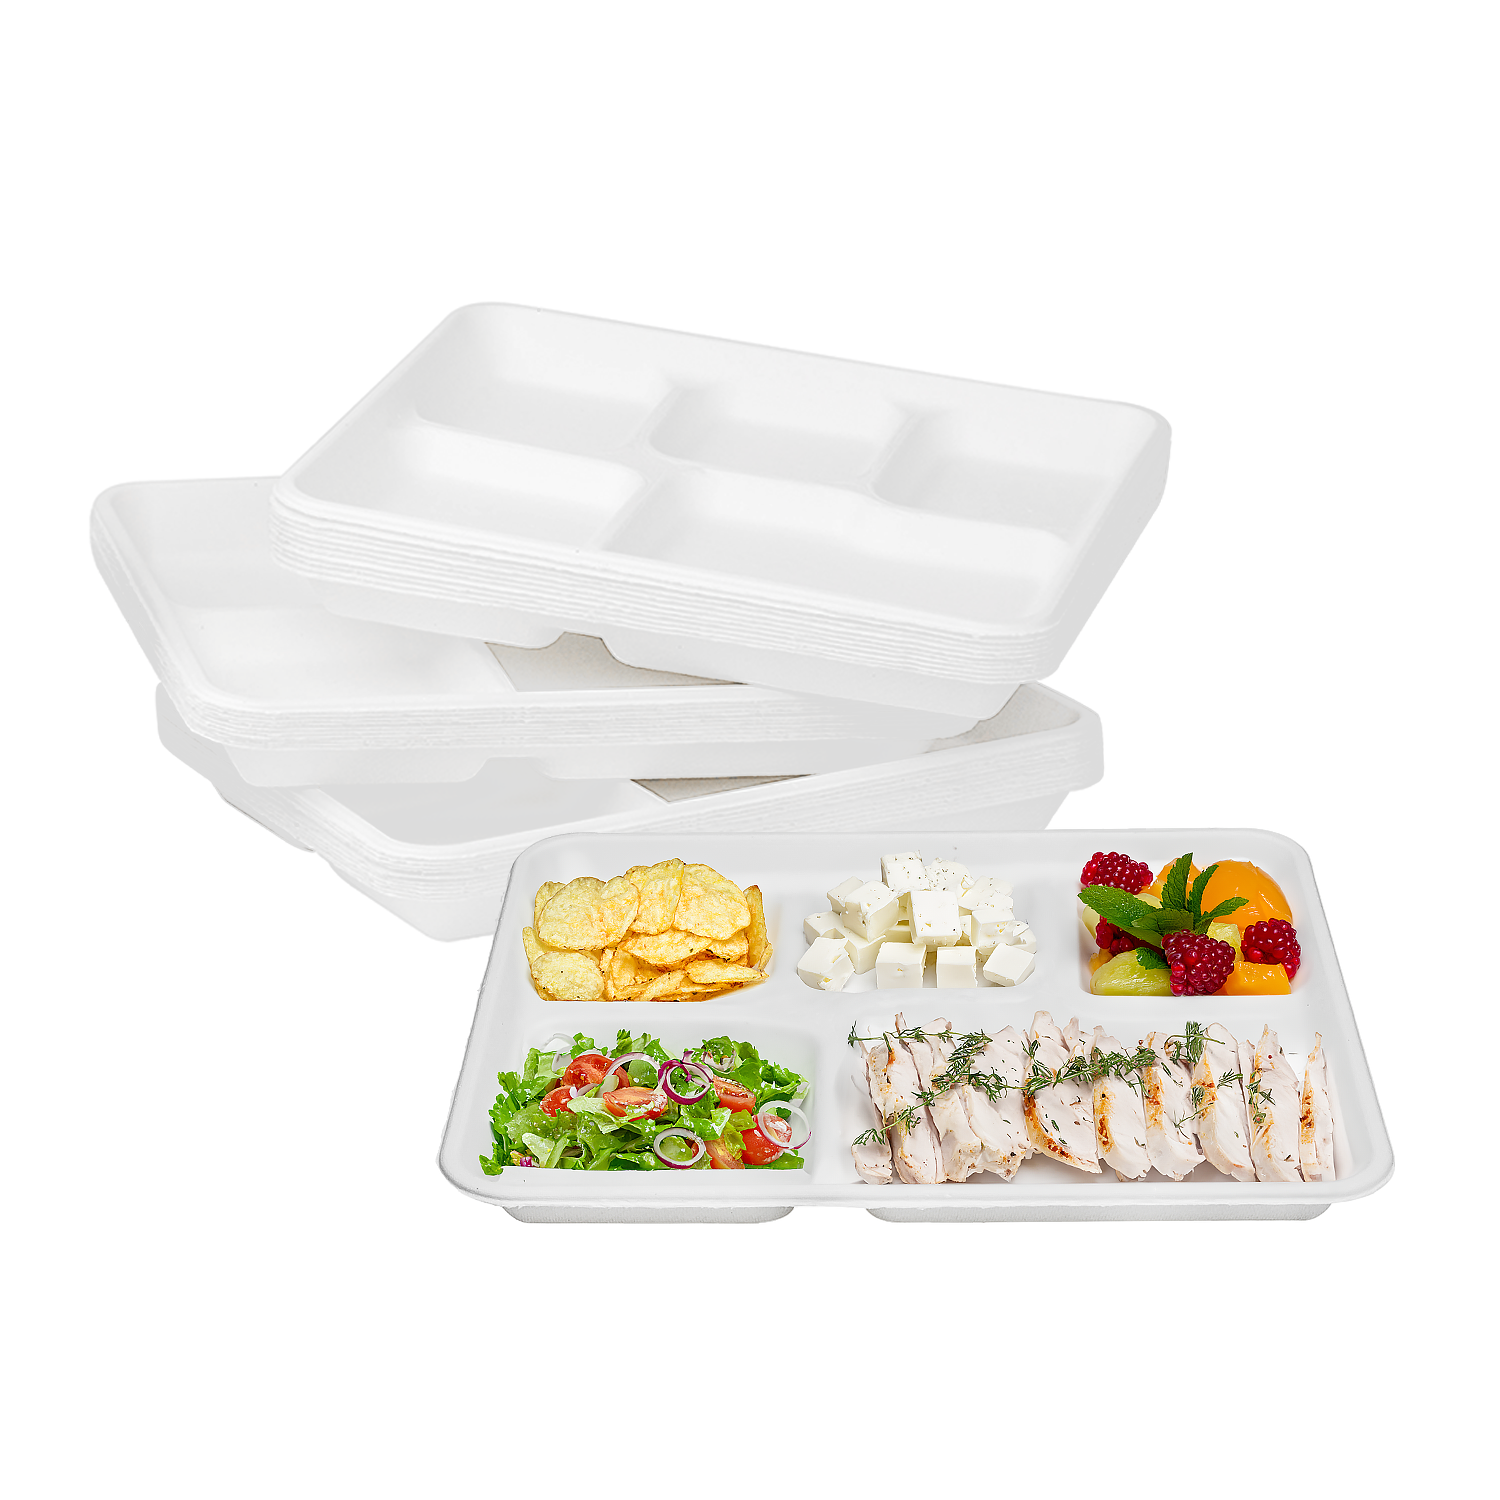 White Karat Earth 10''x8'' PFAS Free Eco-Friendly Bagasse Tray with 5 Compartments stacked and one filled with 5 different foods